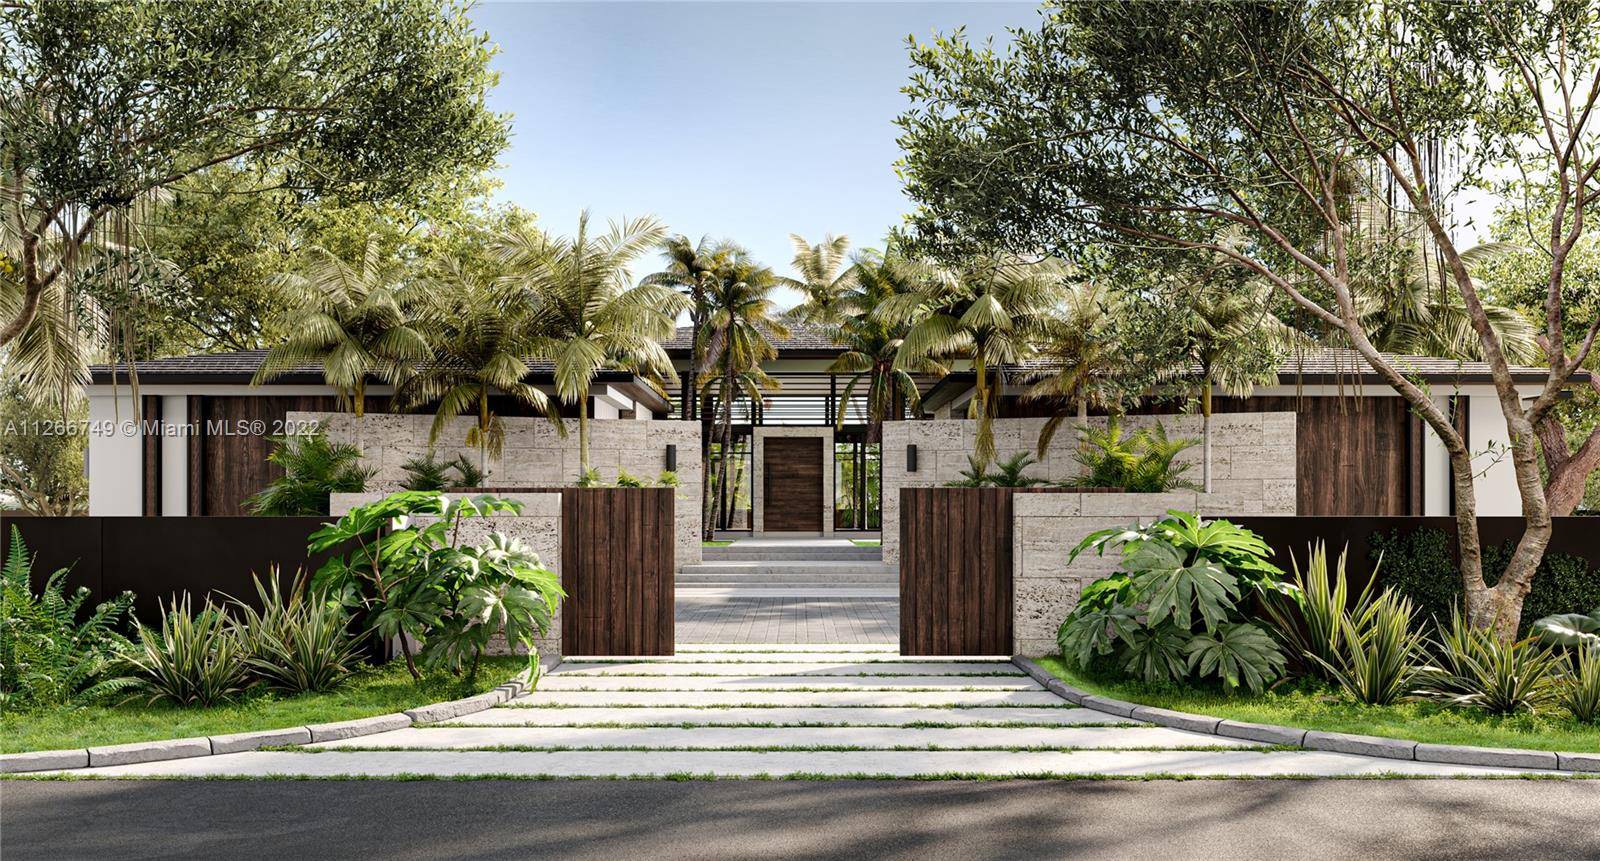 A brand new, spectacular modern tropical oasis estate designed and built by by the award winning MAST Architecture Development.